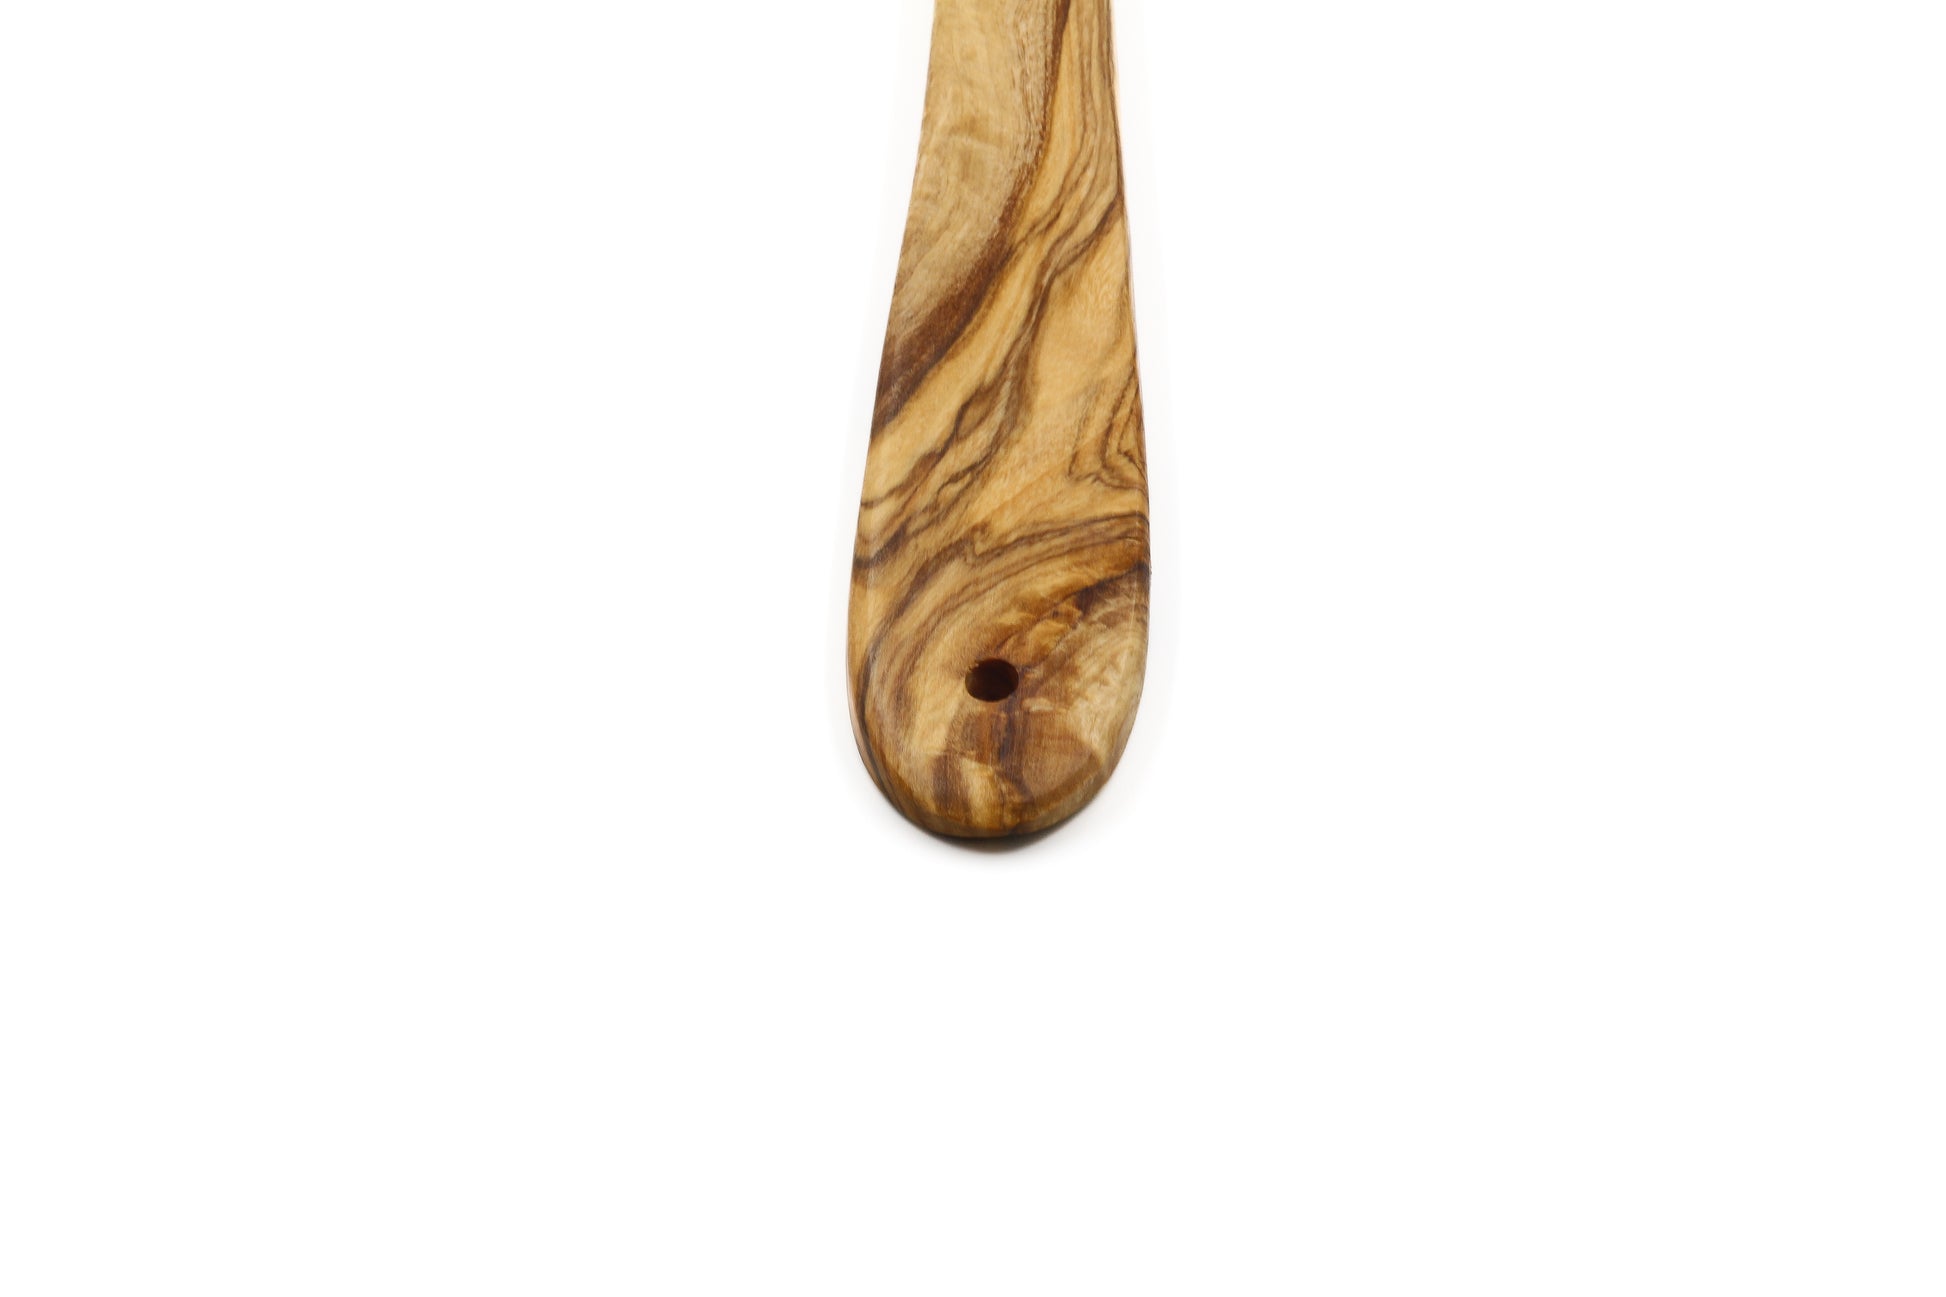 Cook your favorite polenta dishes with this olive wood spoon